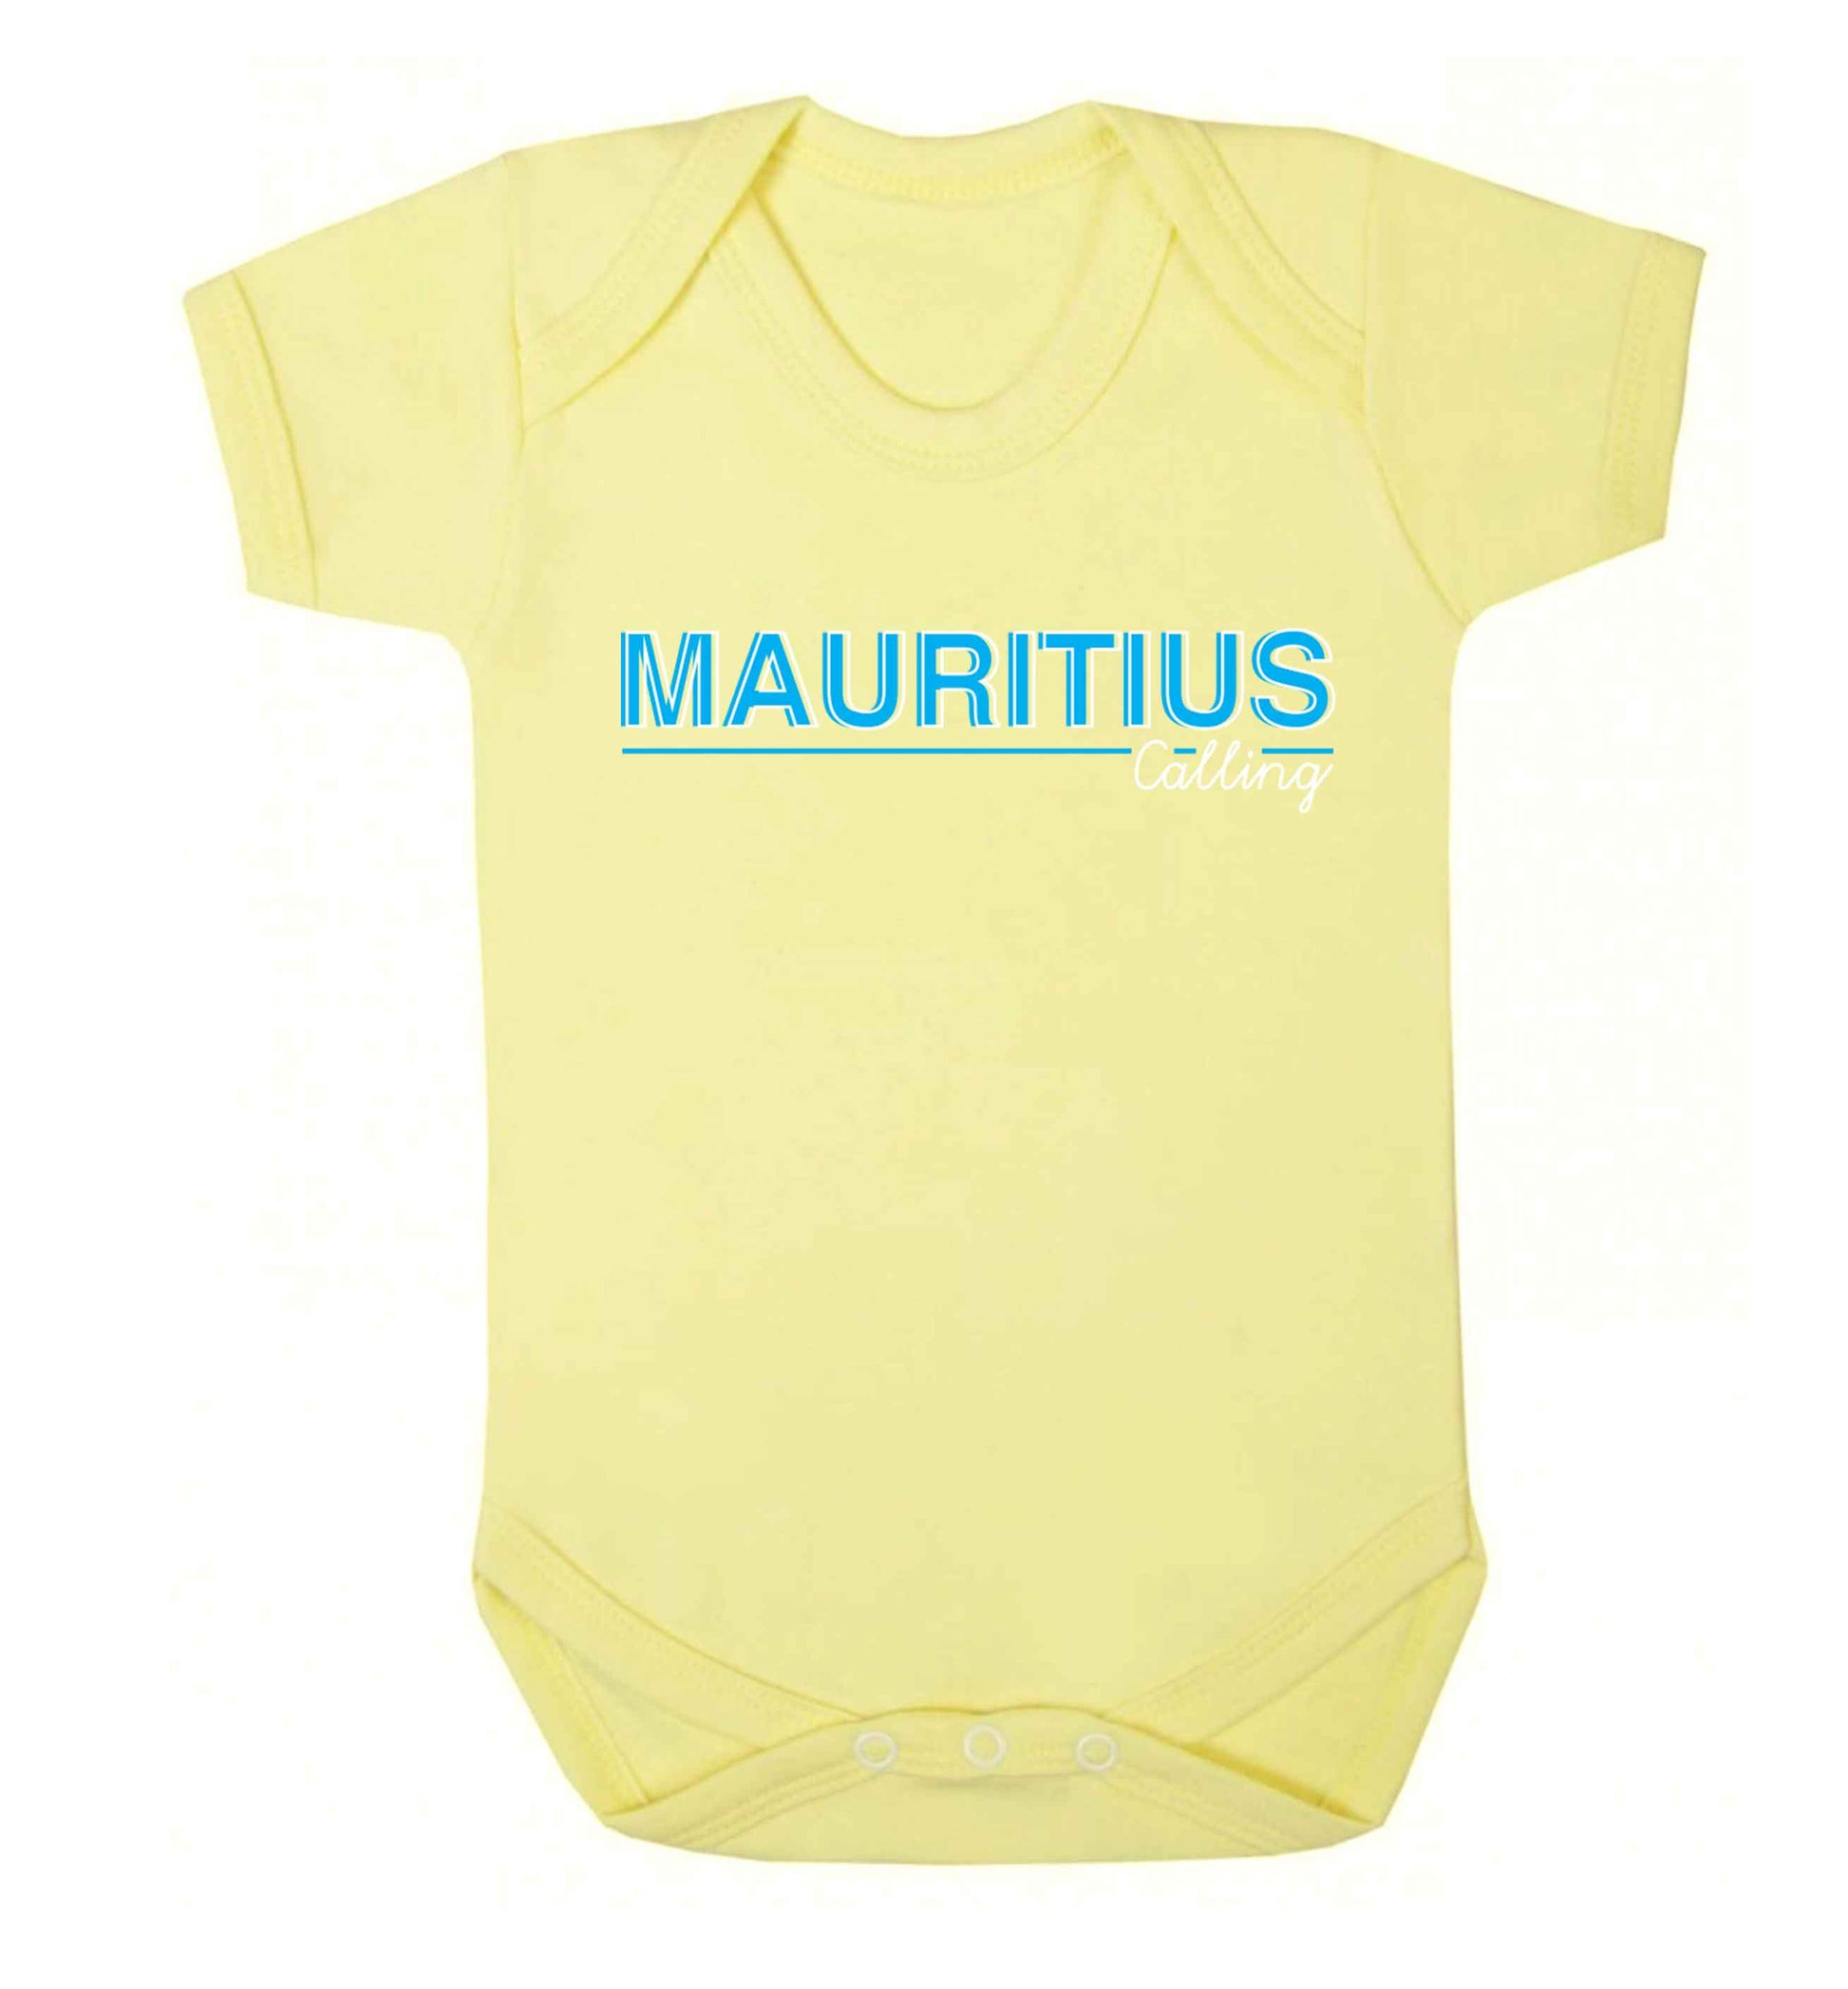 Mauritius calling Baby Vest pale yellow 18-24 months